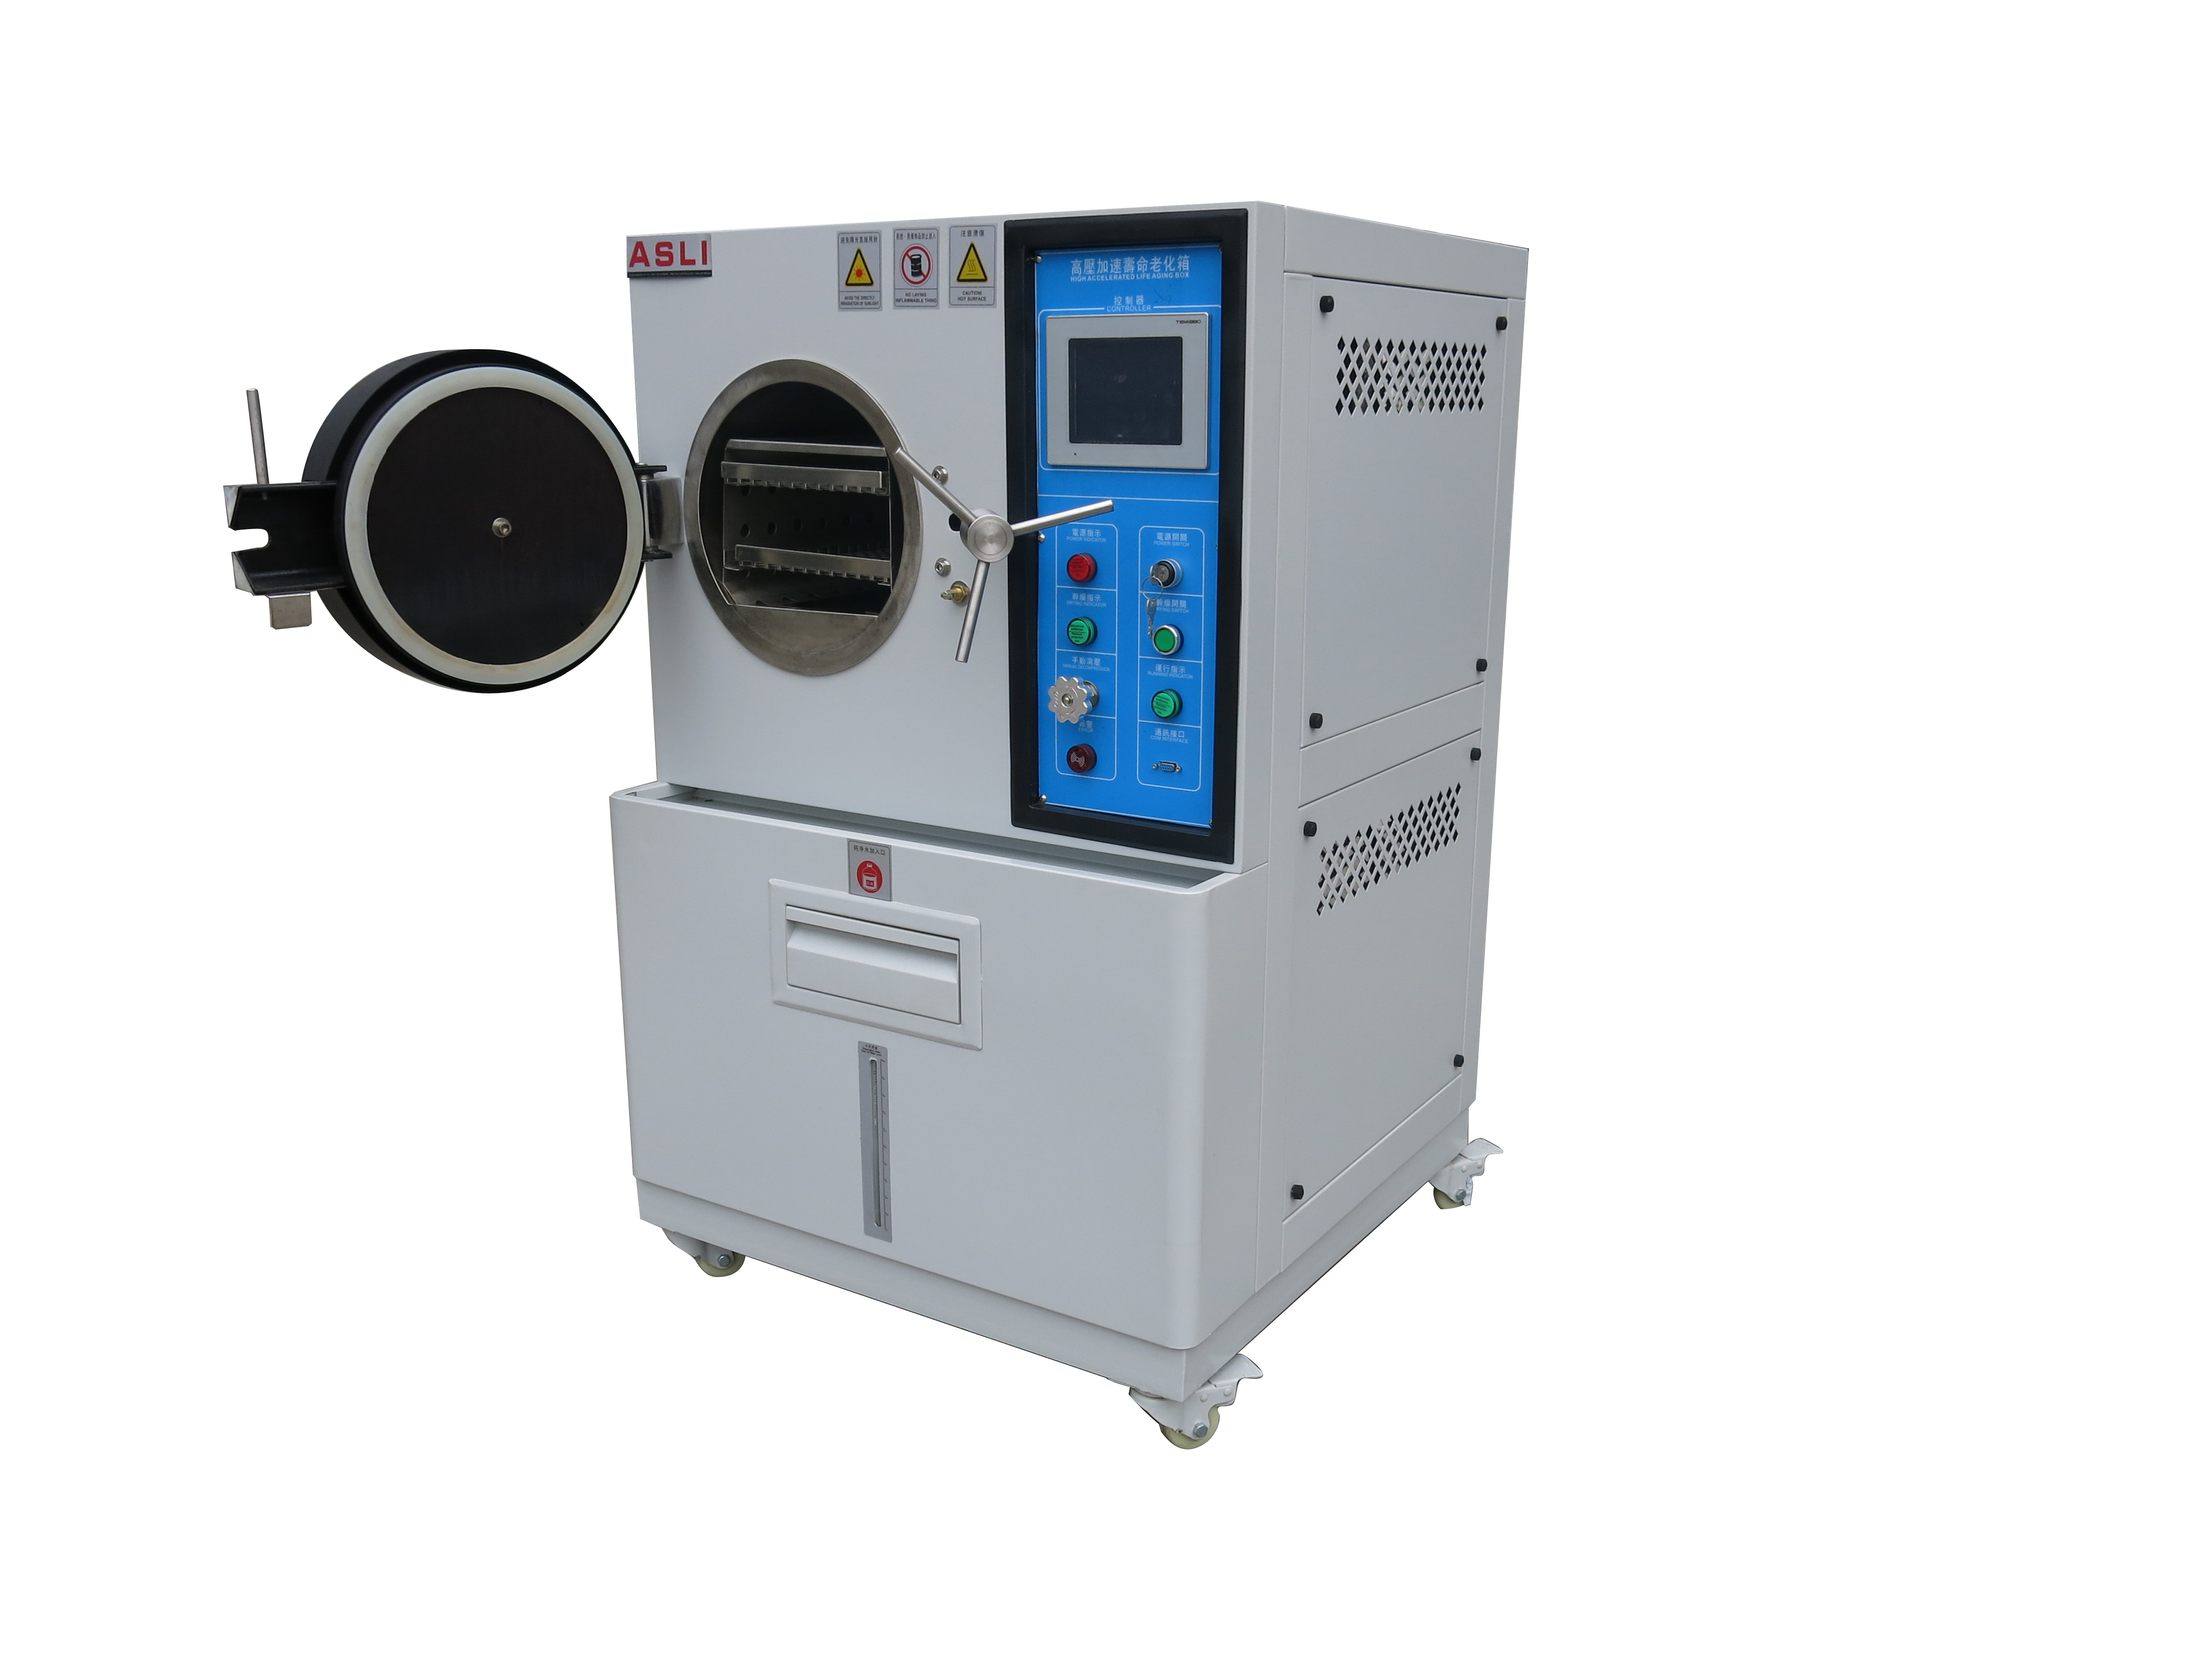 High pressure accelerated aging testing machine / HAST chamber